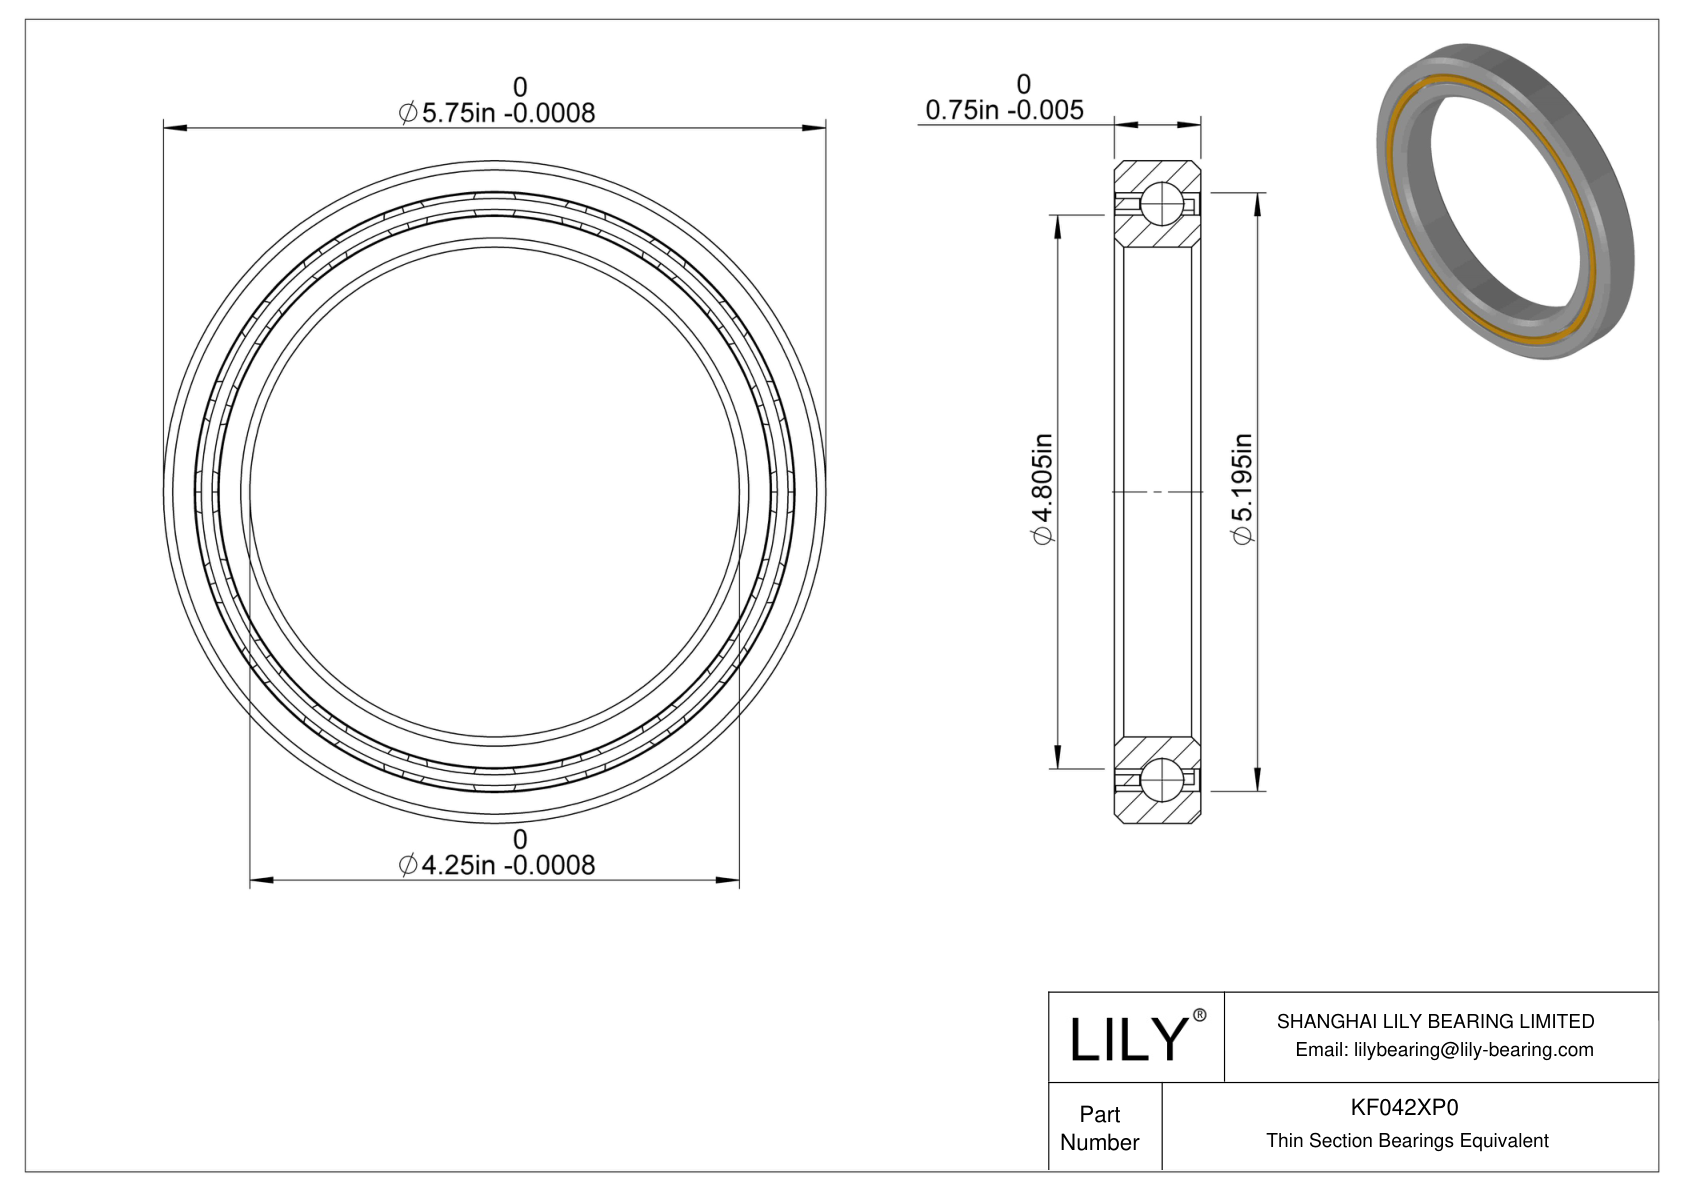 KF042XP0 Constant Section (CS) Bearings cad drawing